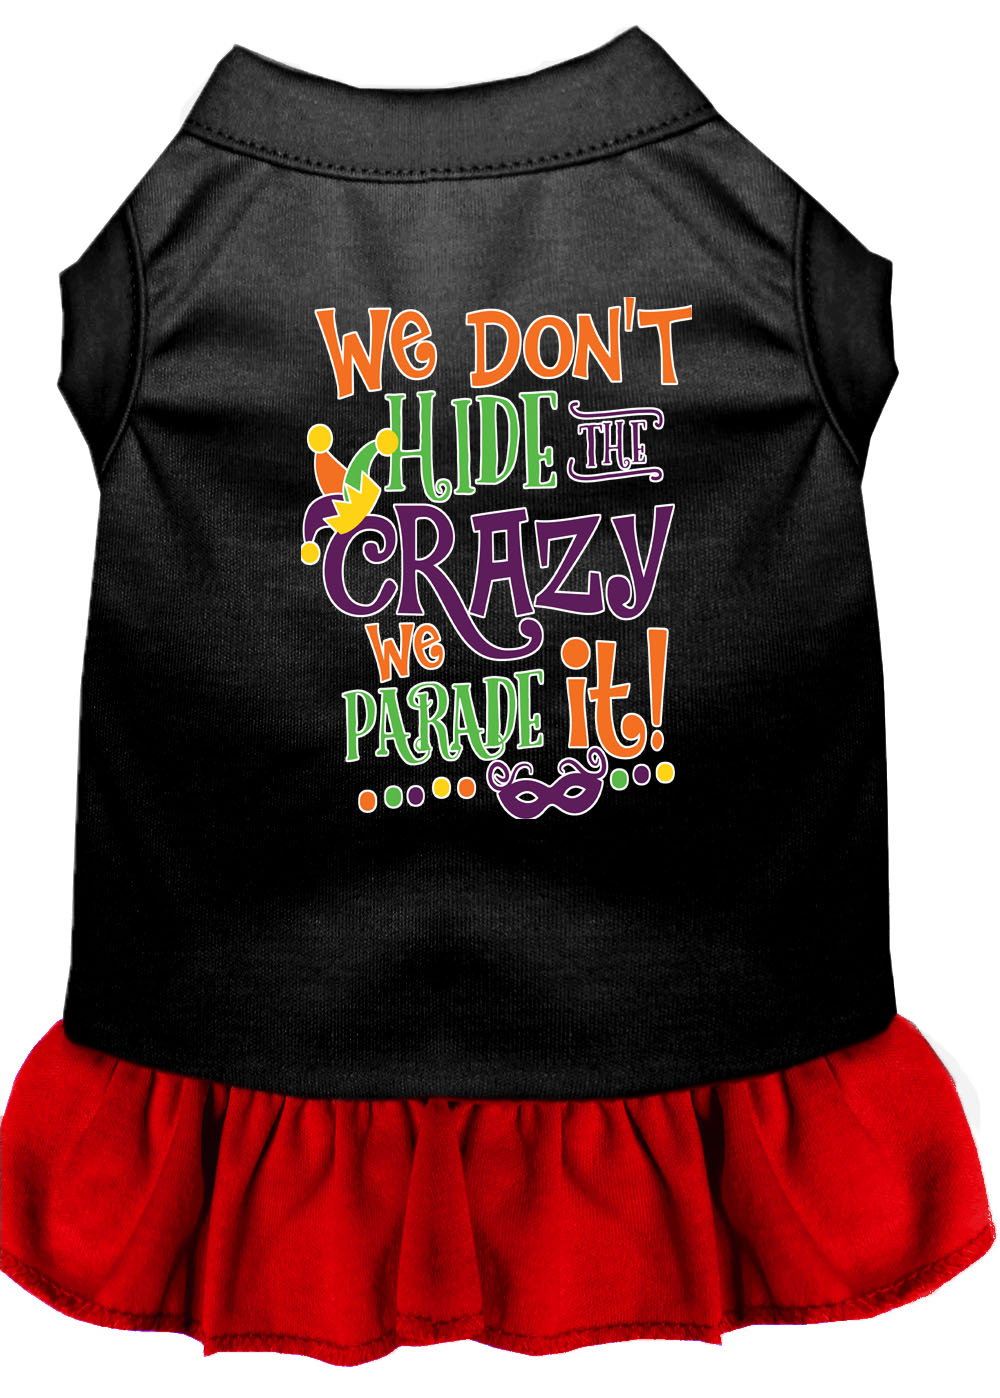 We Don't Hide the Crazy Screen Print Mardi Gras Dog Dress Black with Red Sm